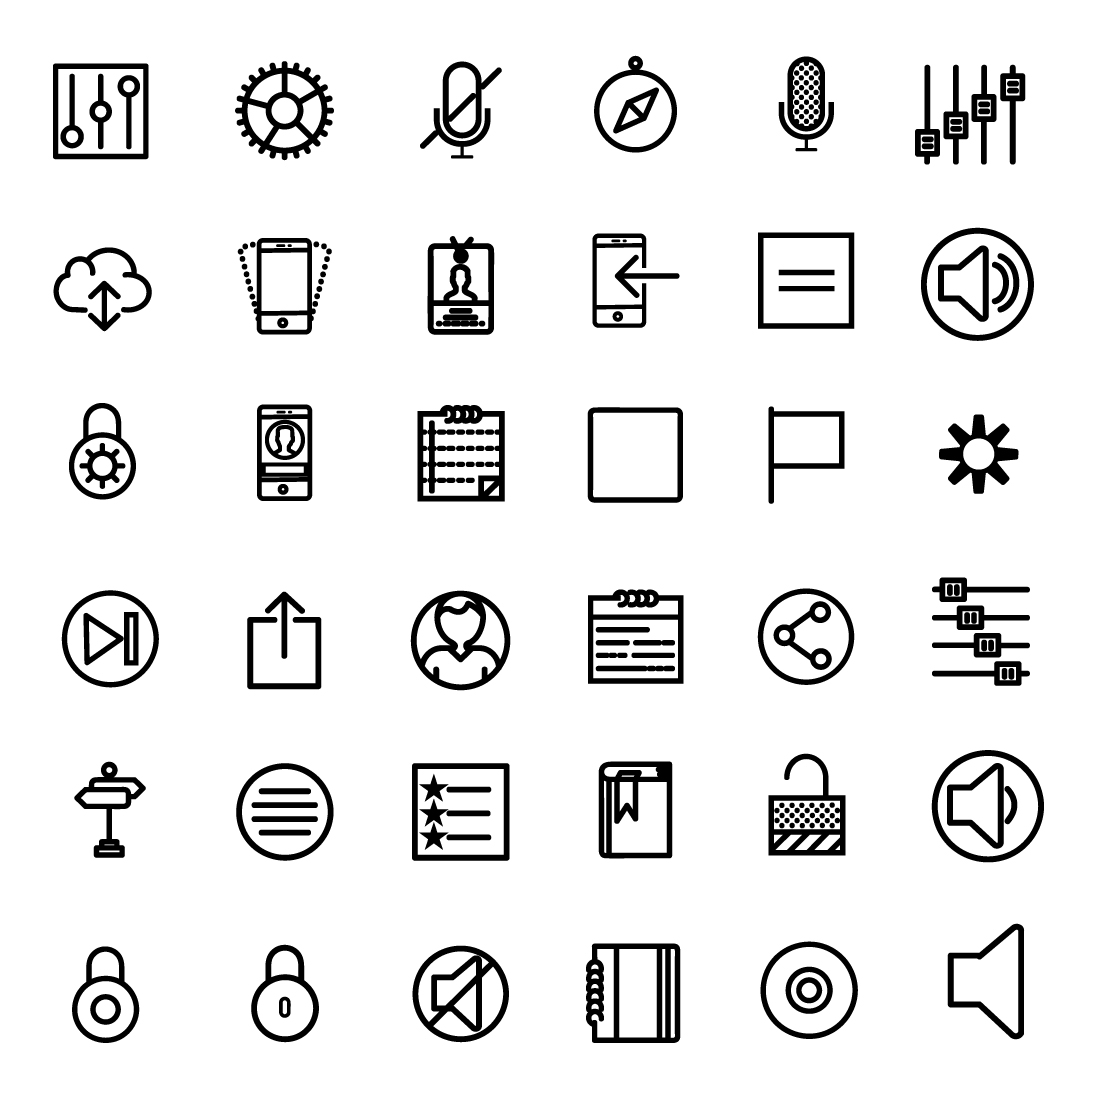 Set of different types of icons on a white background.